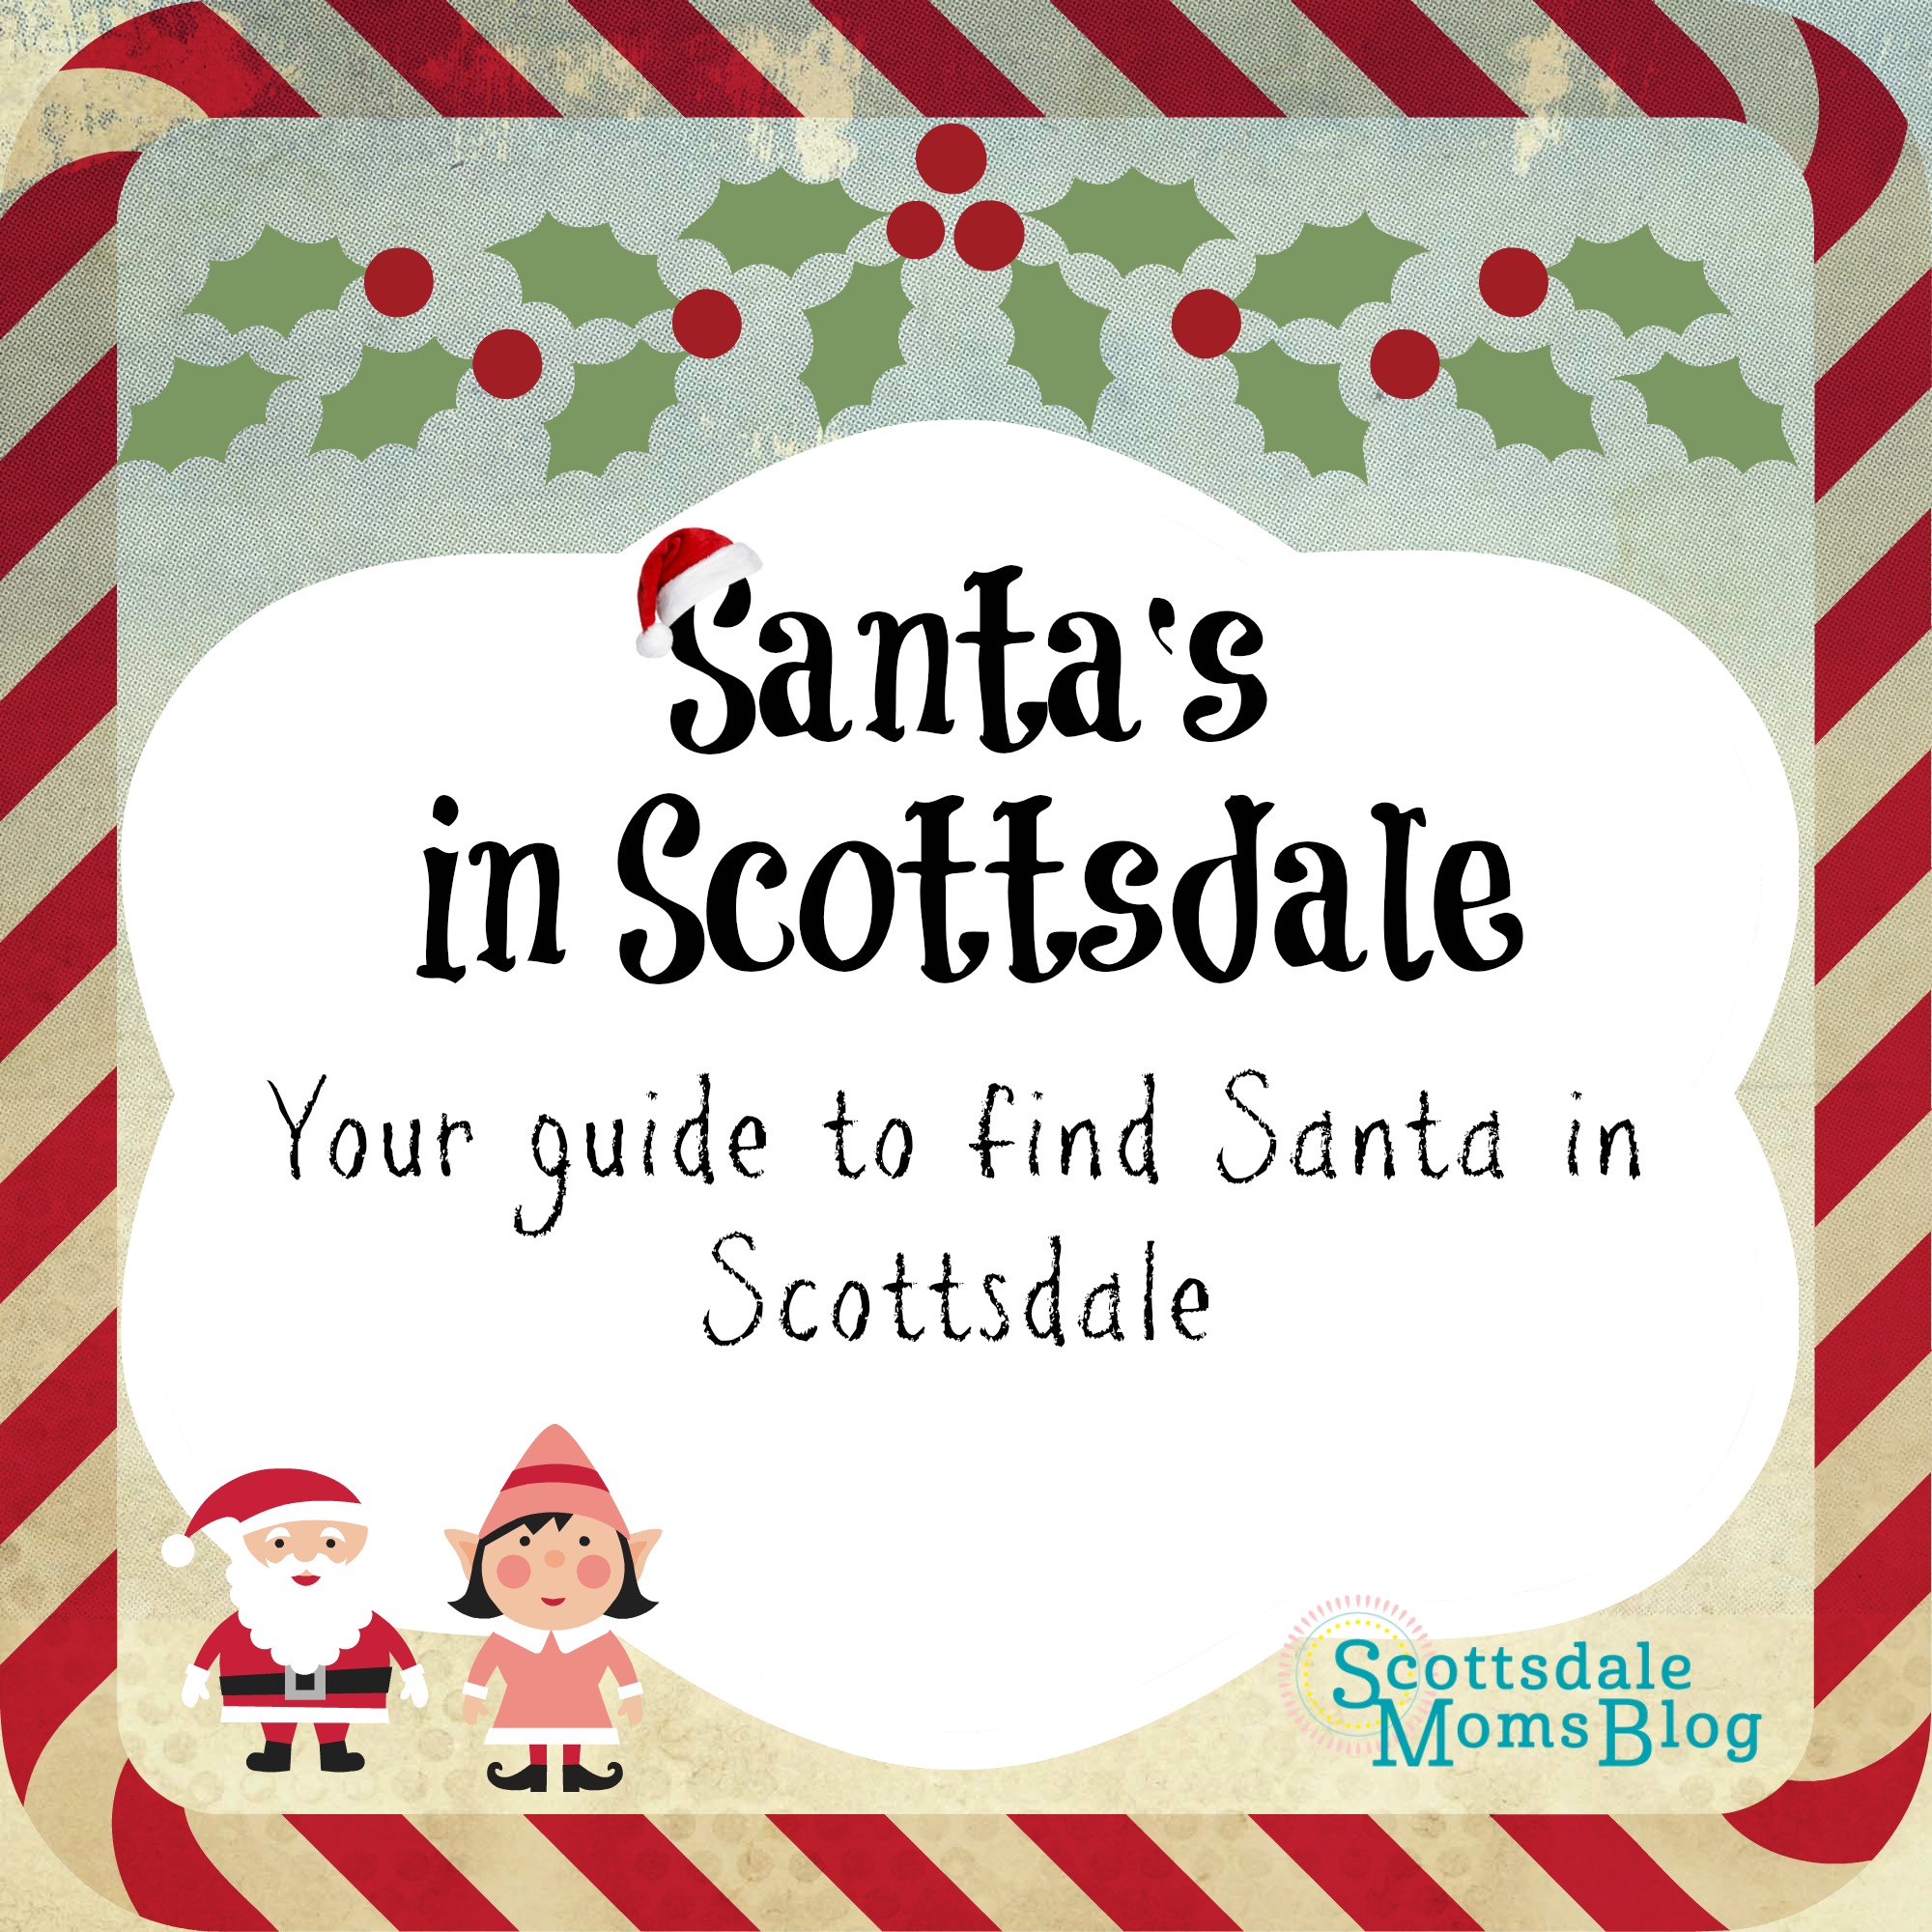 Where to go to find Santa in Scottsdale